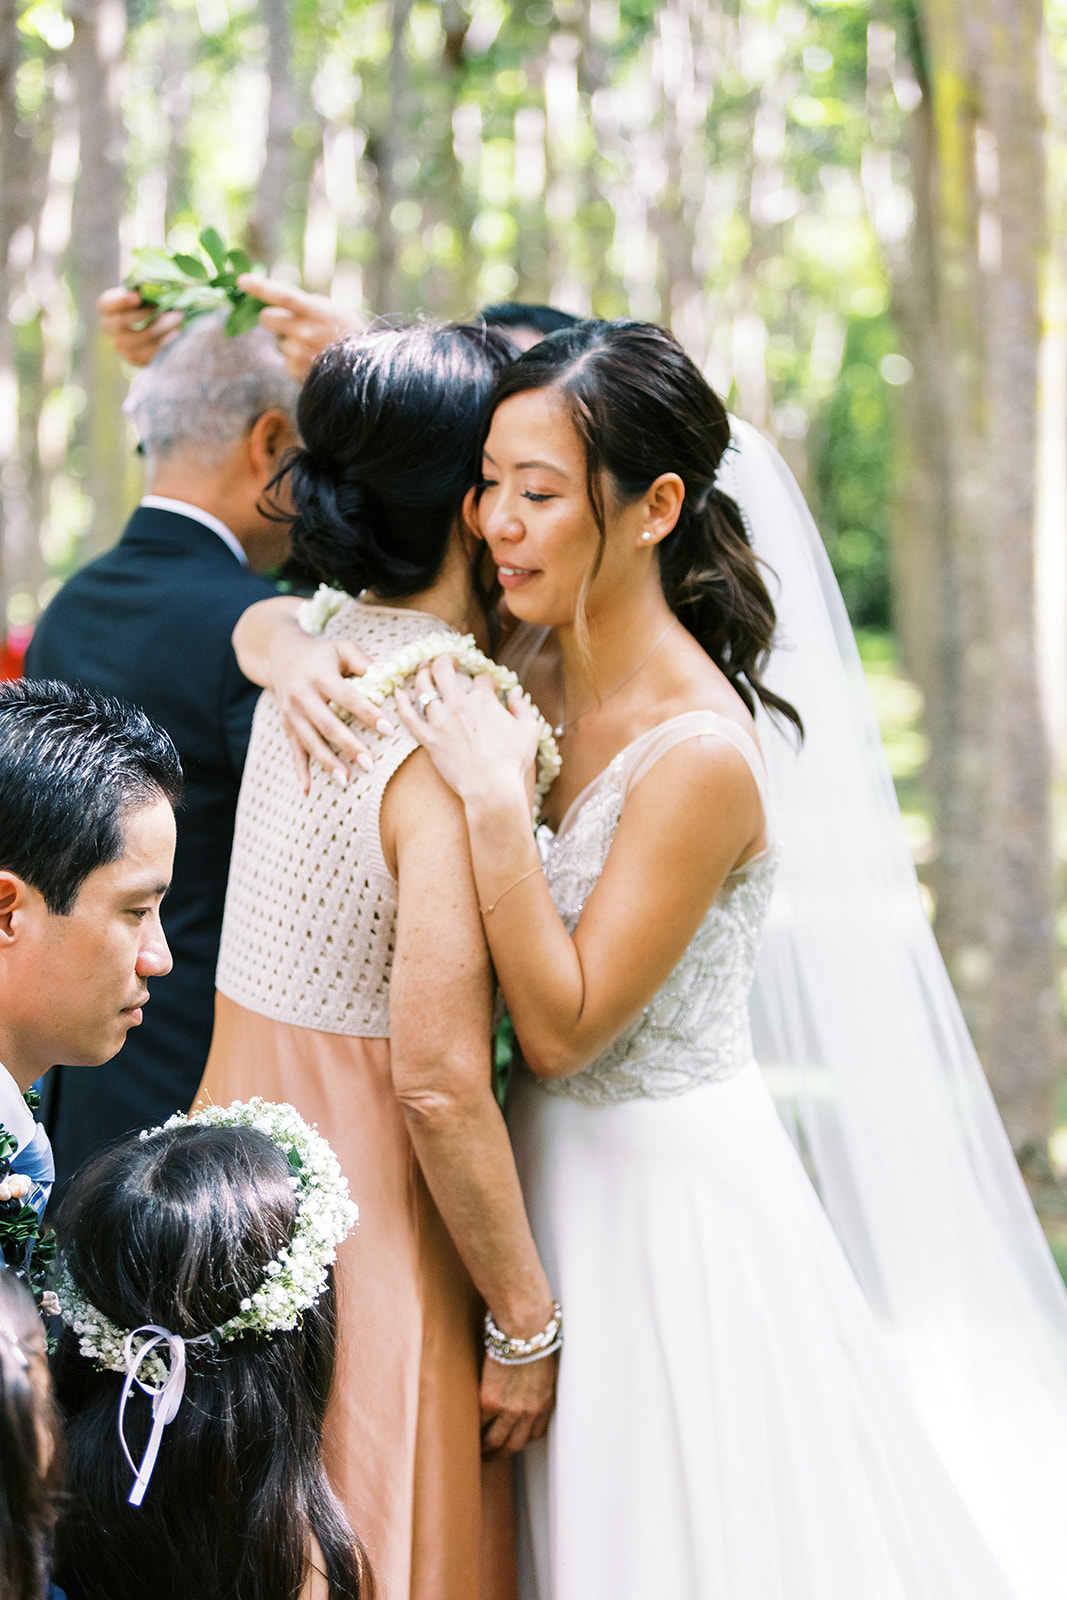 A bride embracing her mother at a wedding ceremony amidst a wooded setting captured by Oahu Wedding Photographer